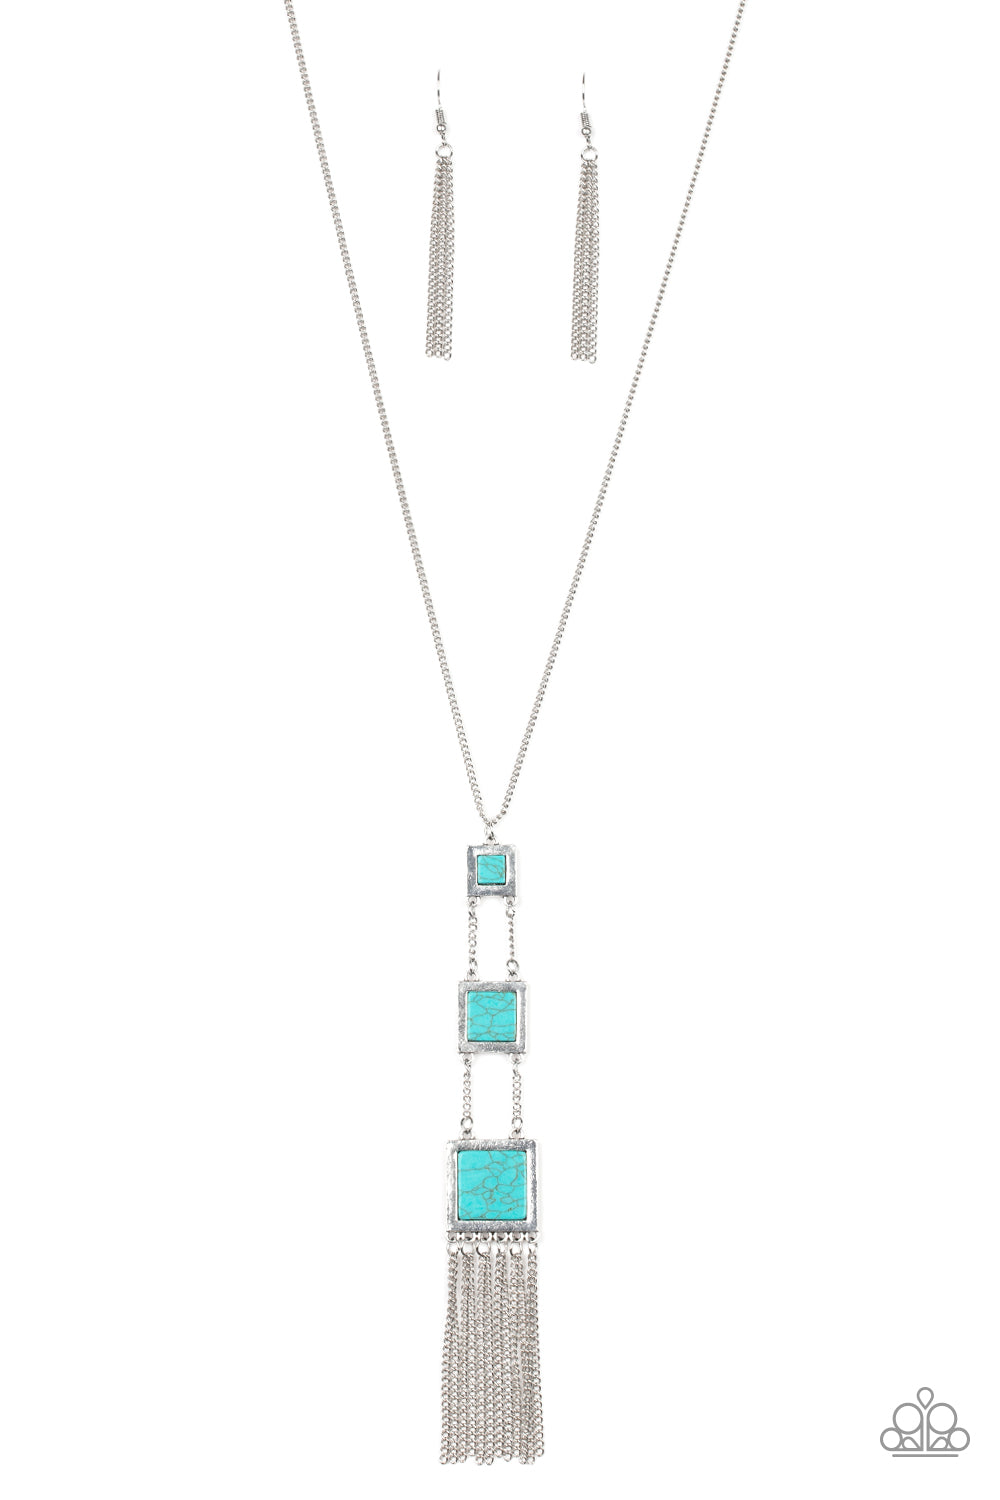 Square silver frames featuring turquoise stone centers, gradually increase in size as they link down the chest. Shimmery silver chains stream from the bottom, adding movement to the seasonal piece. Features an adjustable clasp closure.